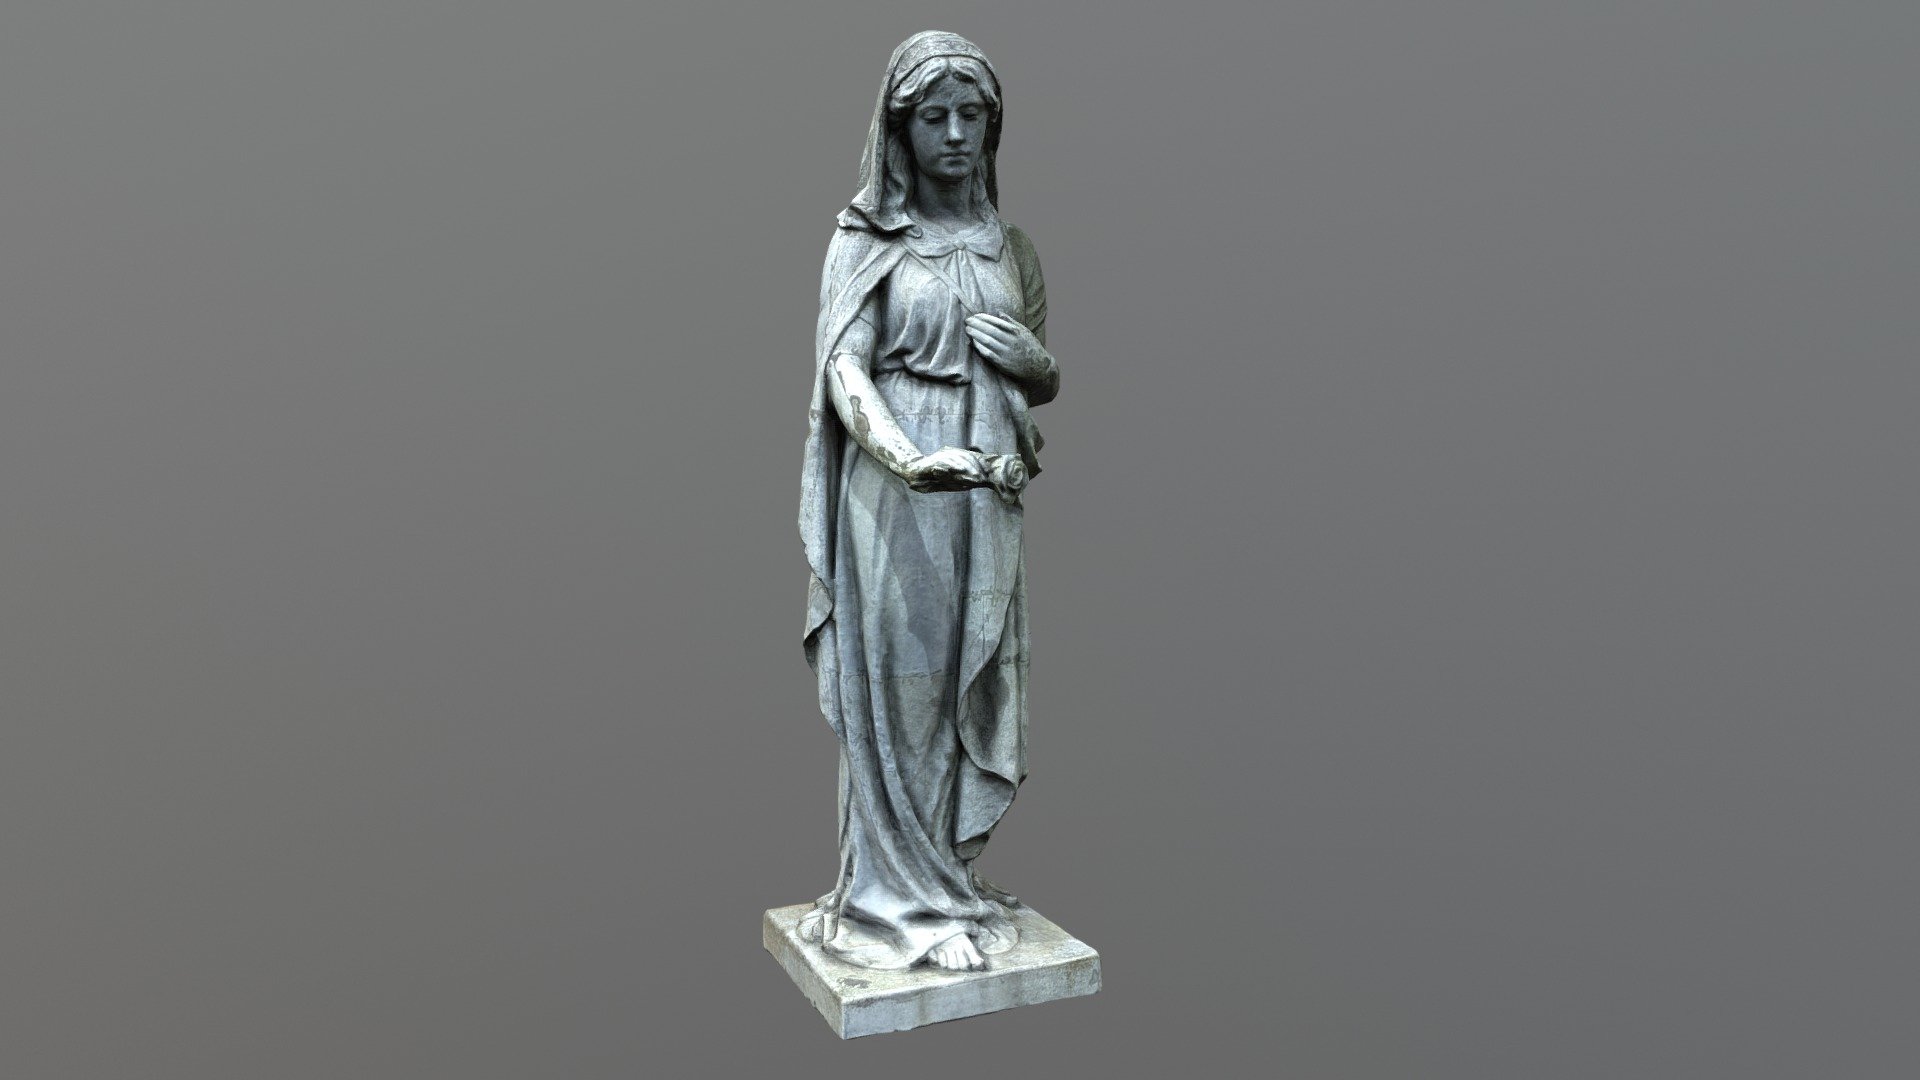 Statue of Sorrow PBR

Real-Life photogrammetry, then optimized for use in Game Engines.

Very Detailed Old Statue of a woman in Sorrow, PBR Textures, perfect for Exterior Landscape Decoration in any game genre

The Statue is broken behind, and you can actually look inside and see some of its interior.

Low Poly

22107 Polys 
11072 Verts

Textures are in 4K

Real-Life photogrammetry, then optimized for use in Game Engines.

Fits perfect for any PBR game as Exterior / Landscape Decoration - Statue of Sorrow PBR - 3D model by GamePoly (@triix3d) 3d model